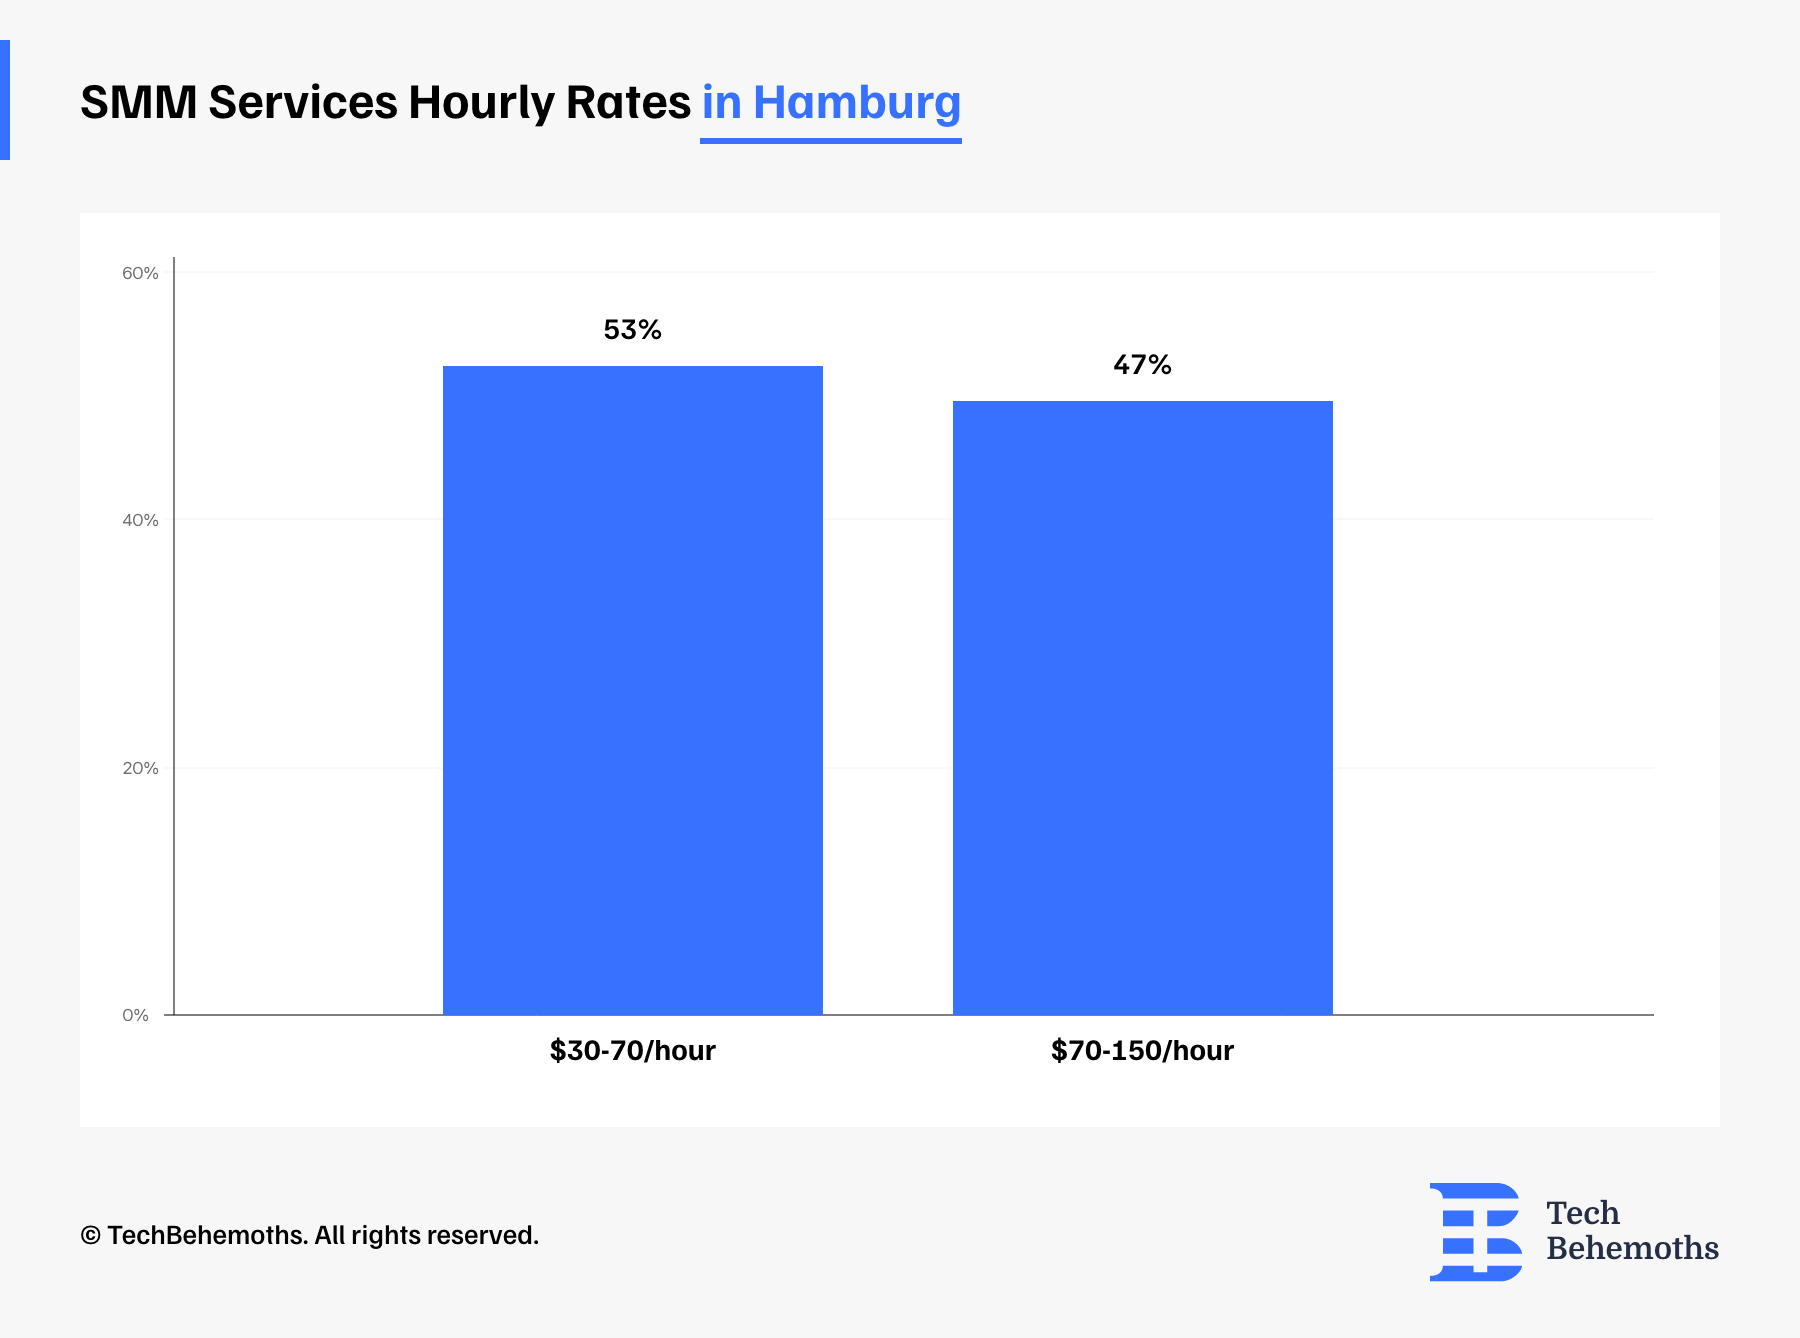 SMM services hourly rates in Hamburg. Germany